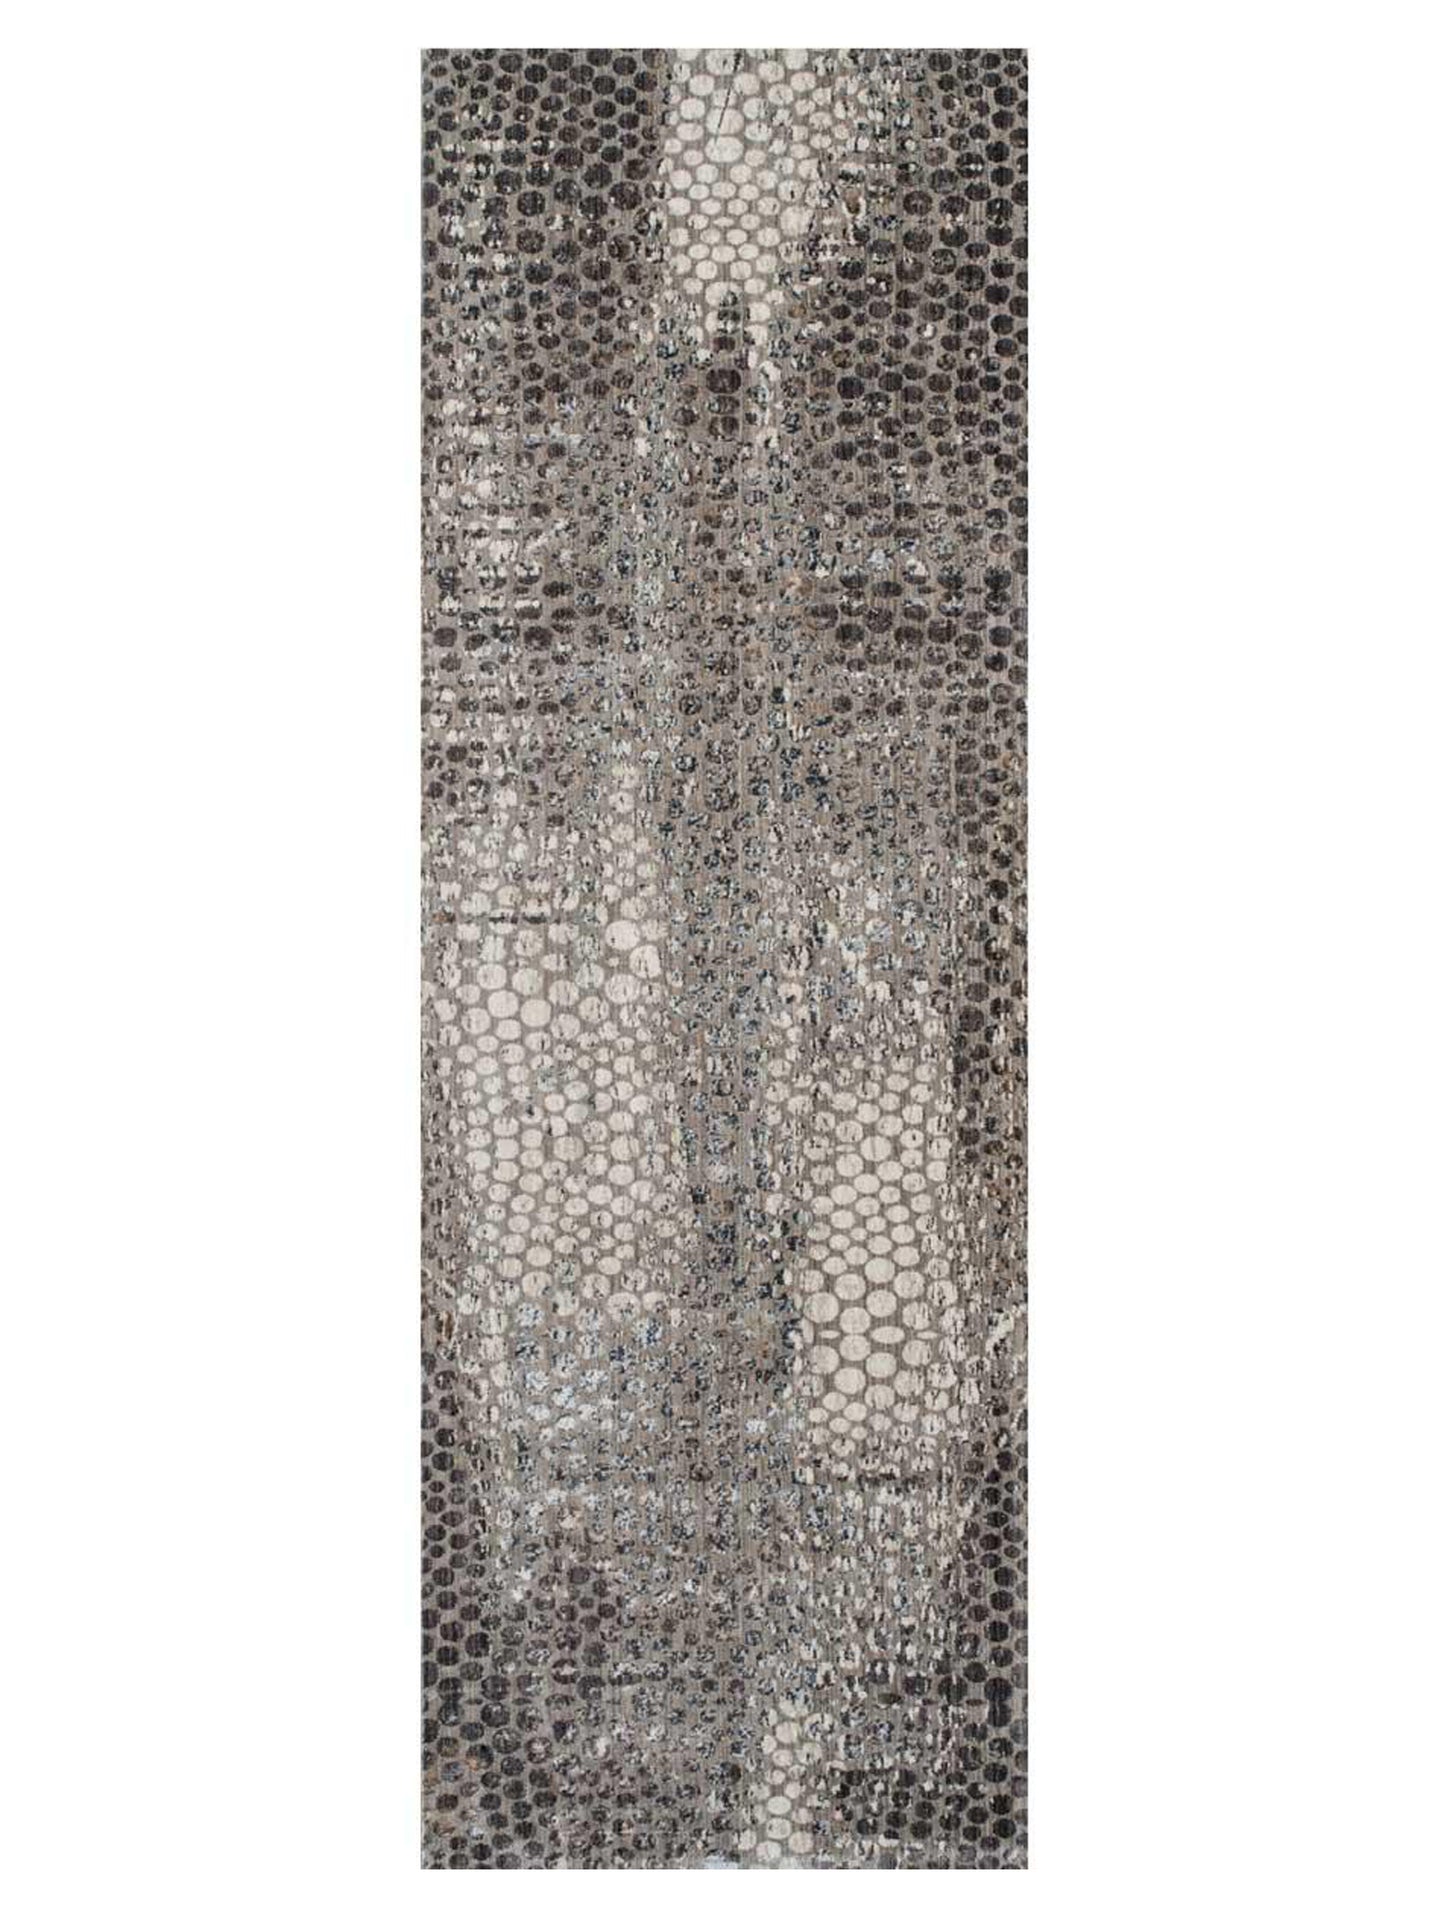 Limited Rosy RO-515 COPPER  Transitional Machinemade Rug